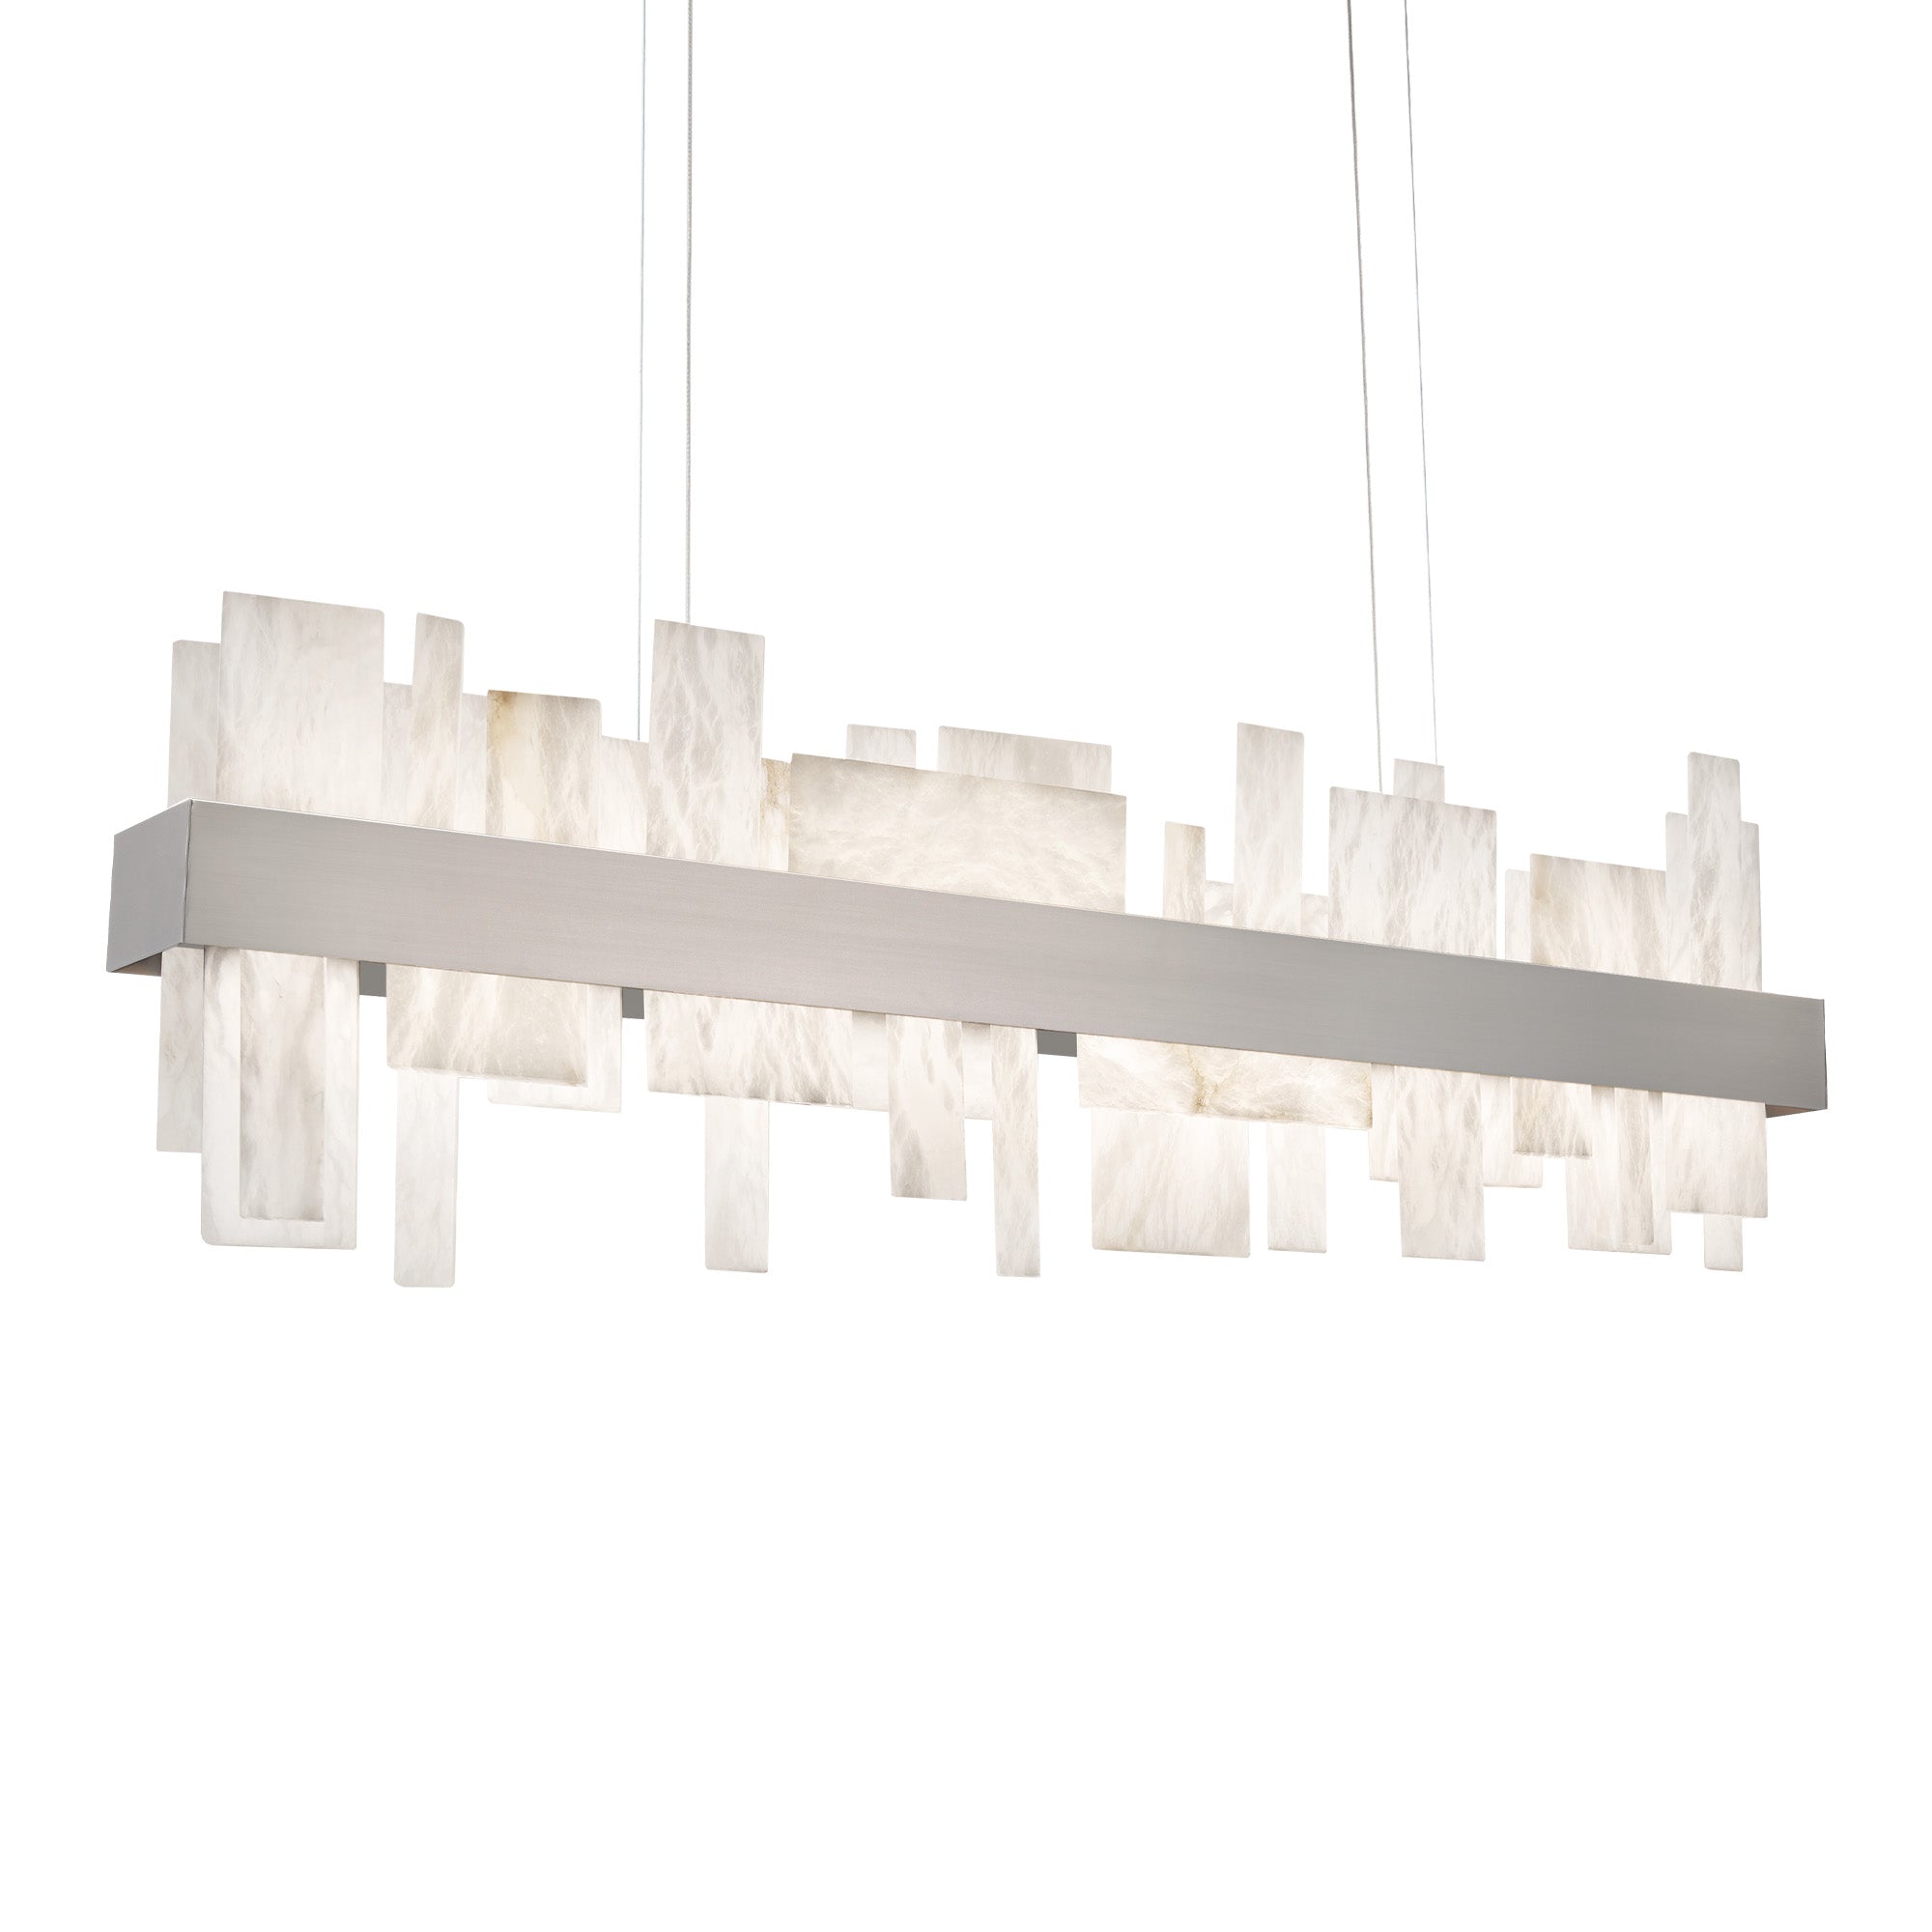 ACROPOLIS Chandelier Nickel INTEGRATED LED - PD-68146-BN | MODERN FORMS